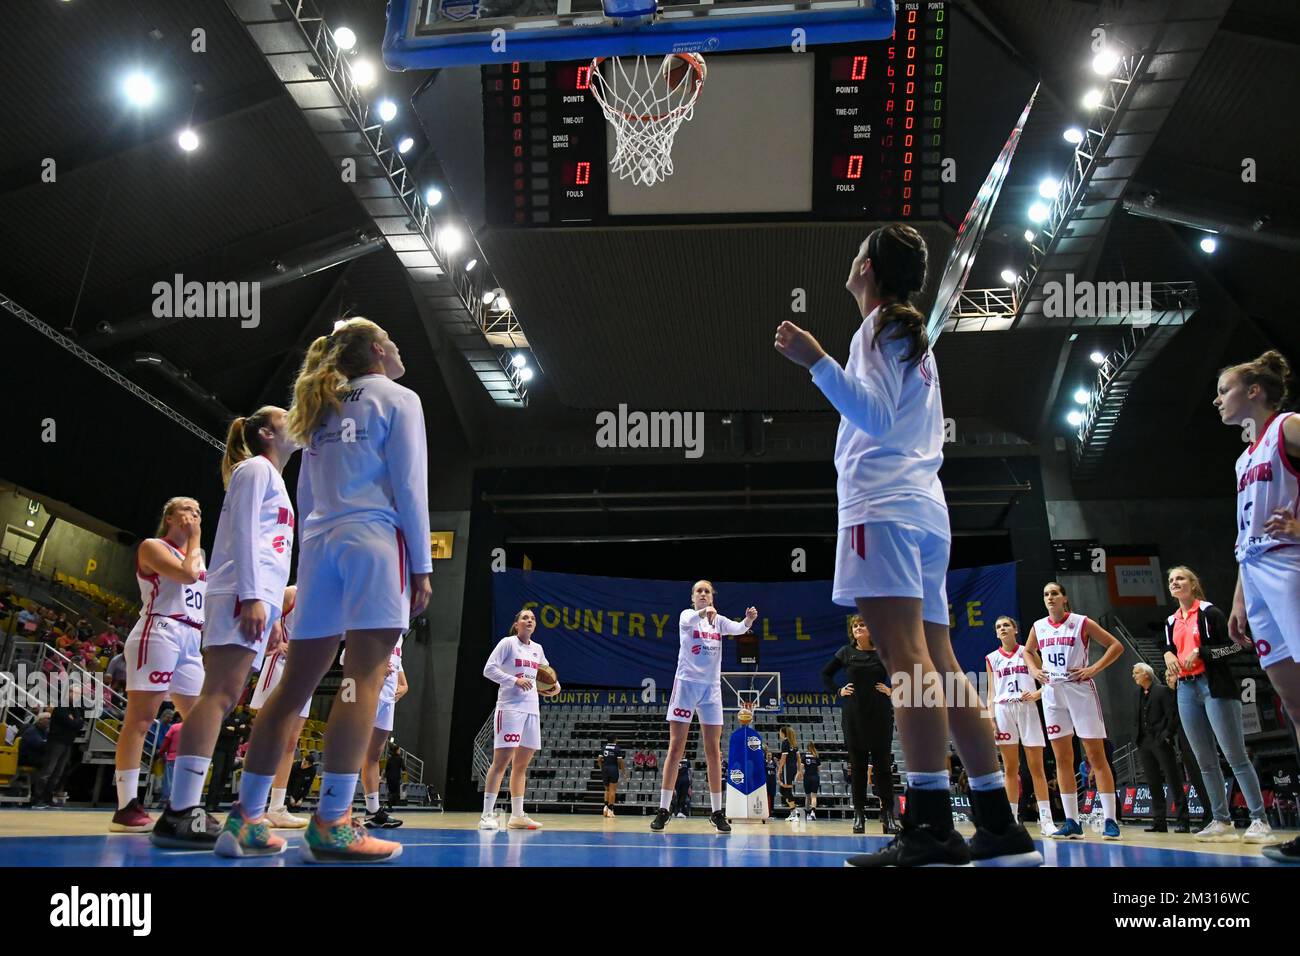 VOO Liege Panthers players pictured before a basketball match between VOO Liege Panthers and BCF Elfic Fribourg, on the gameday 2, group J of the EuroCup Women, Wednesday 23 October 2019, Liege, Country Hall du Sart Tilman. PHOTO BERNARD GILLET Stock Photo